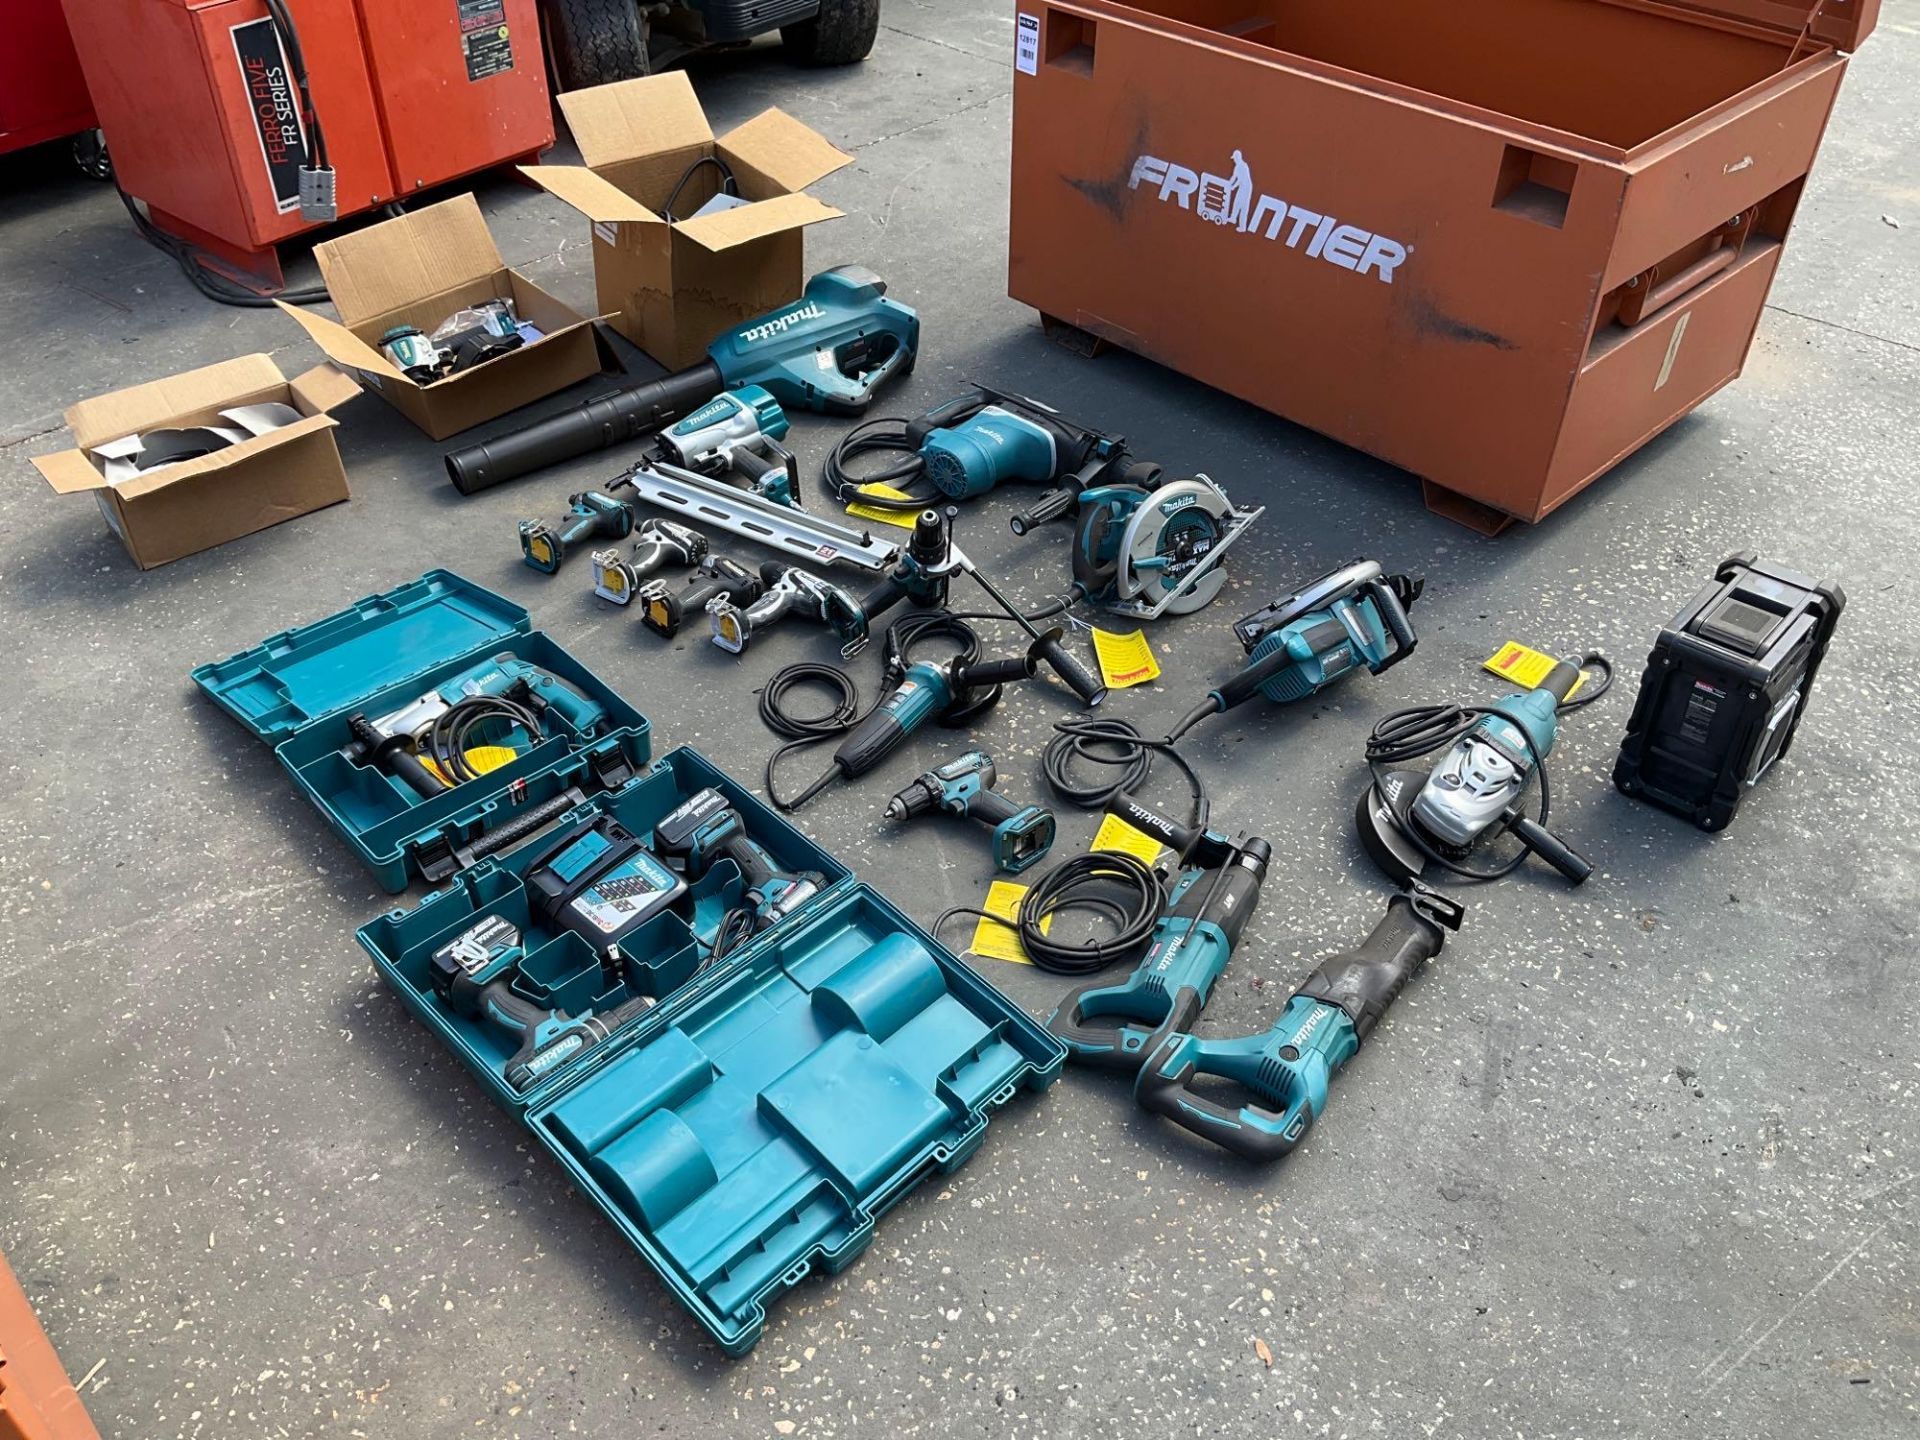 FRONTIER JOB BOX LOADED W/MAKITA TOOLS,( 22) MAKITA TOOLS INCLUDED, TOOLS RECONDITIONED - Image 10 of 10